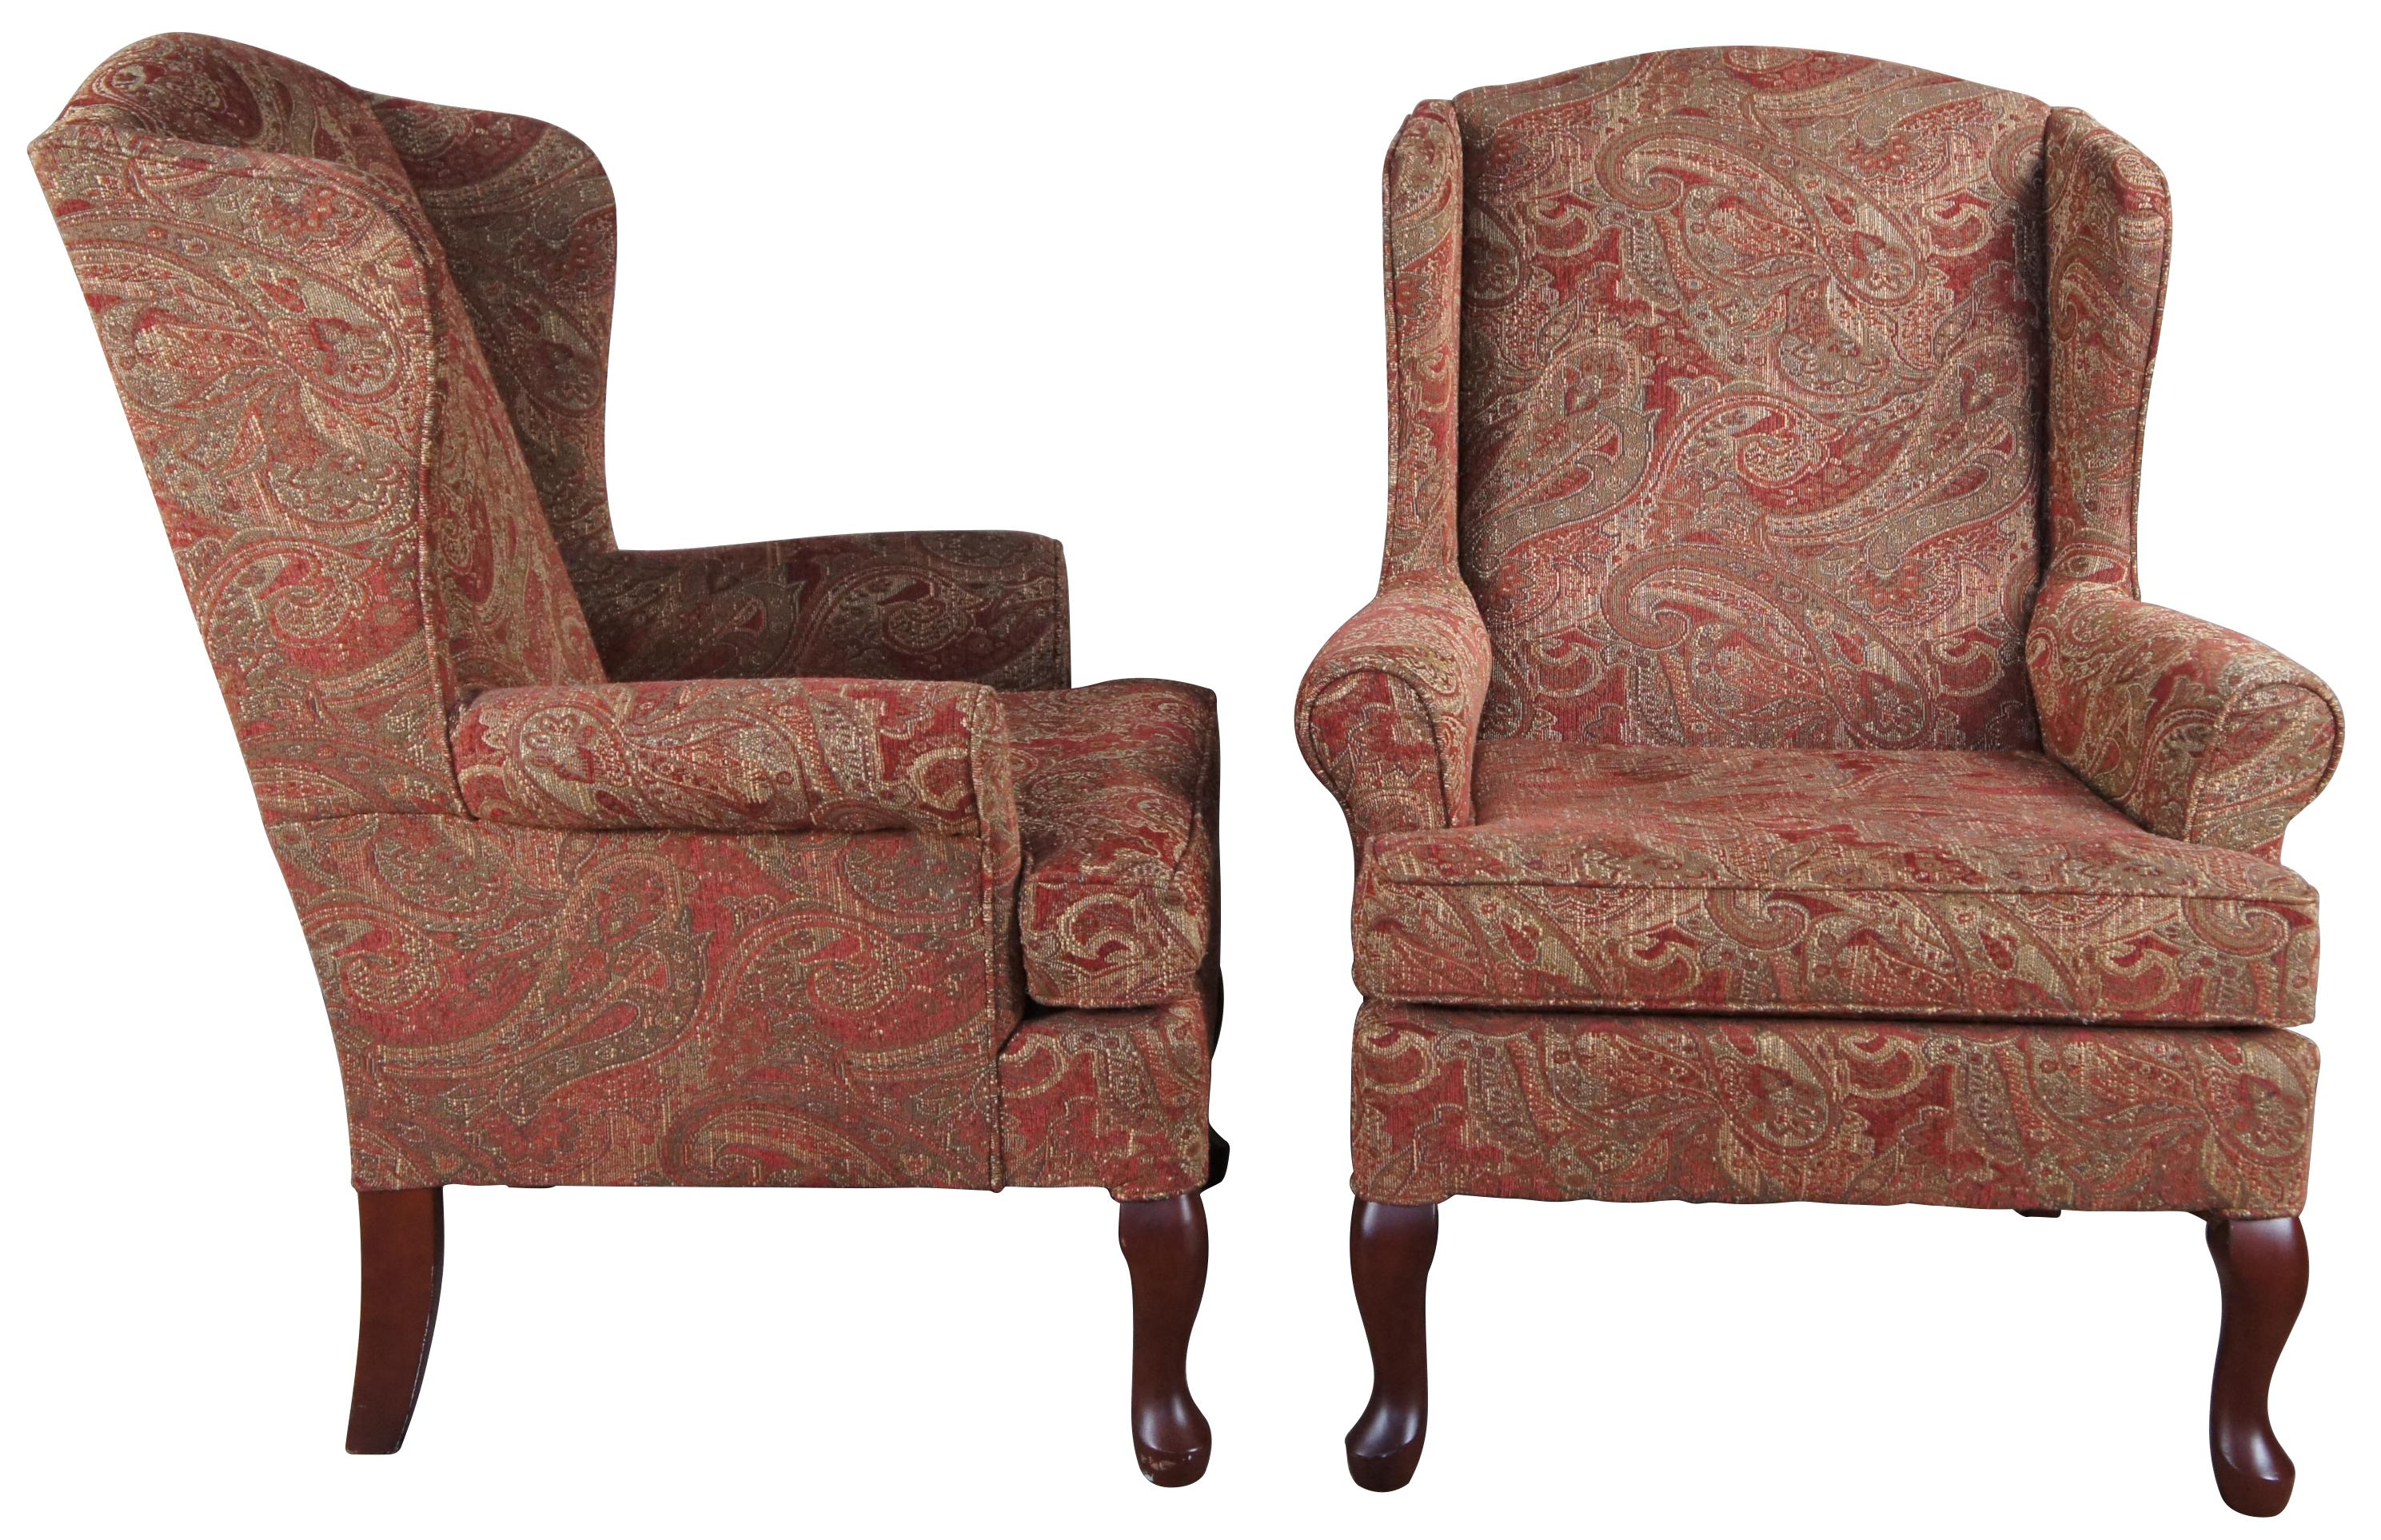 Pair of Best Home Furnishing Wing Chairs. Upholstered in a red and gold fabric with spice finished legs. 

In 1962, two men turned their chair expertise into a yet unknown empire. Over 60 years later, Best Chairs has surpassed all expectations